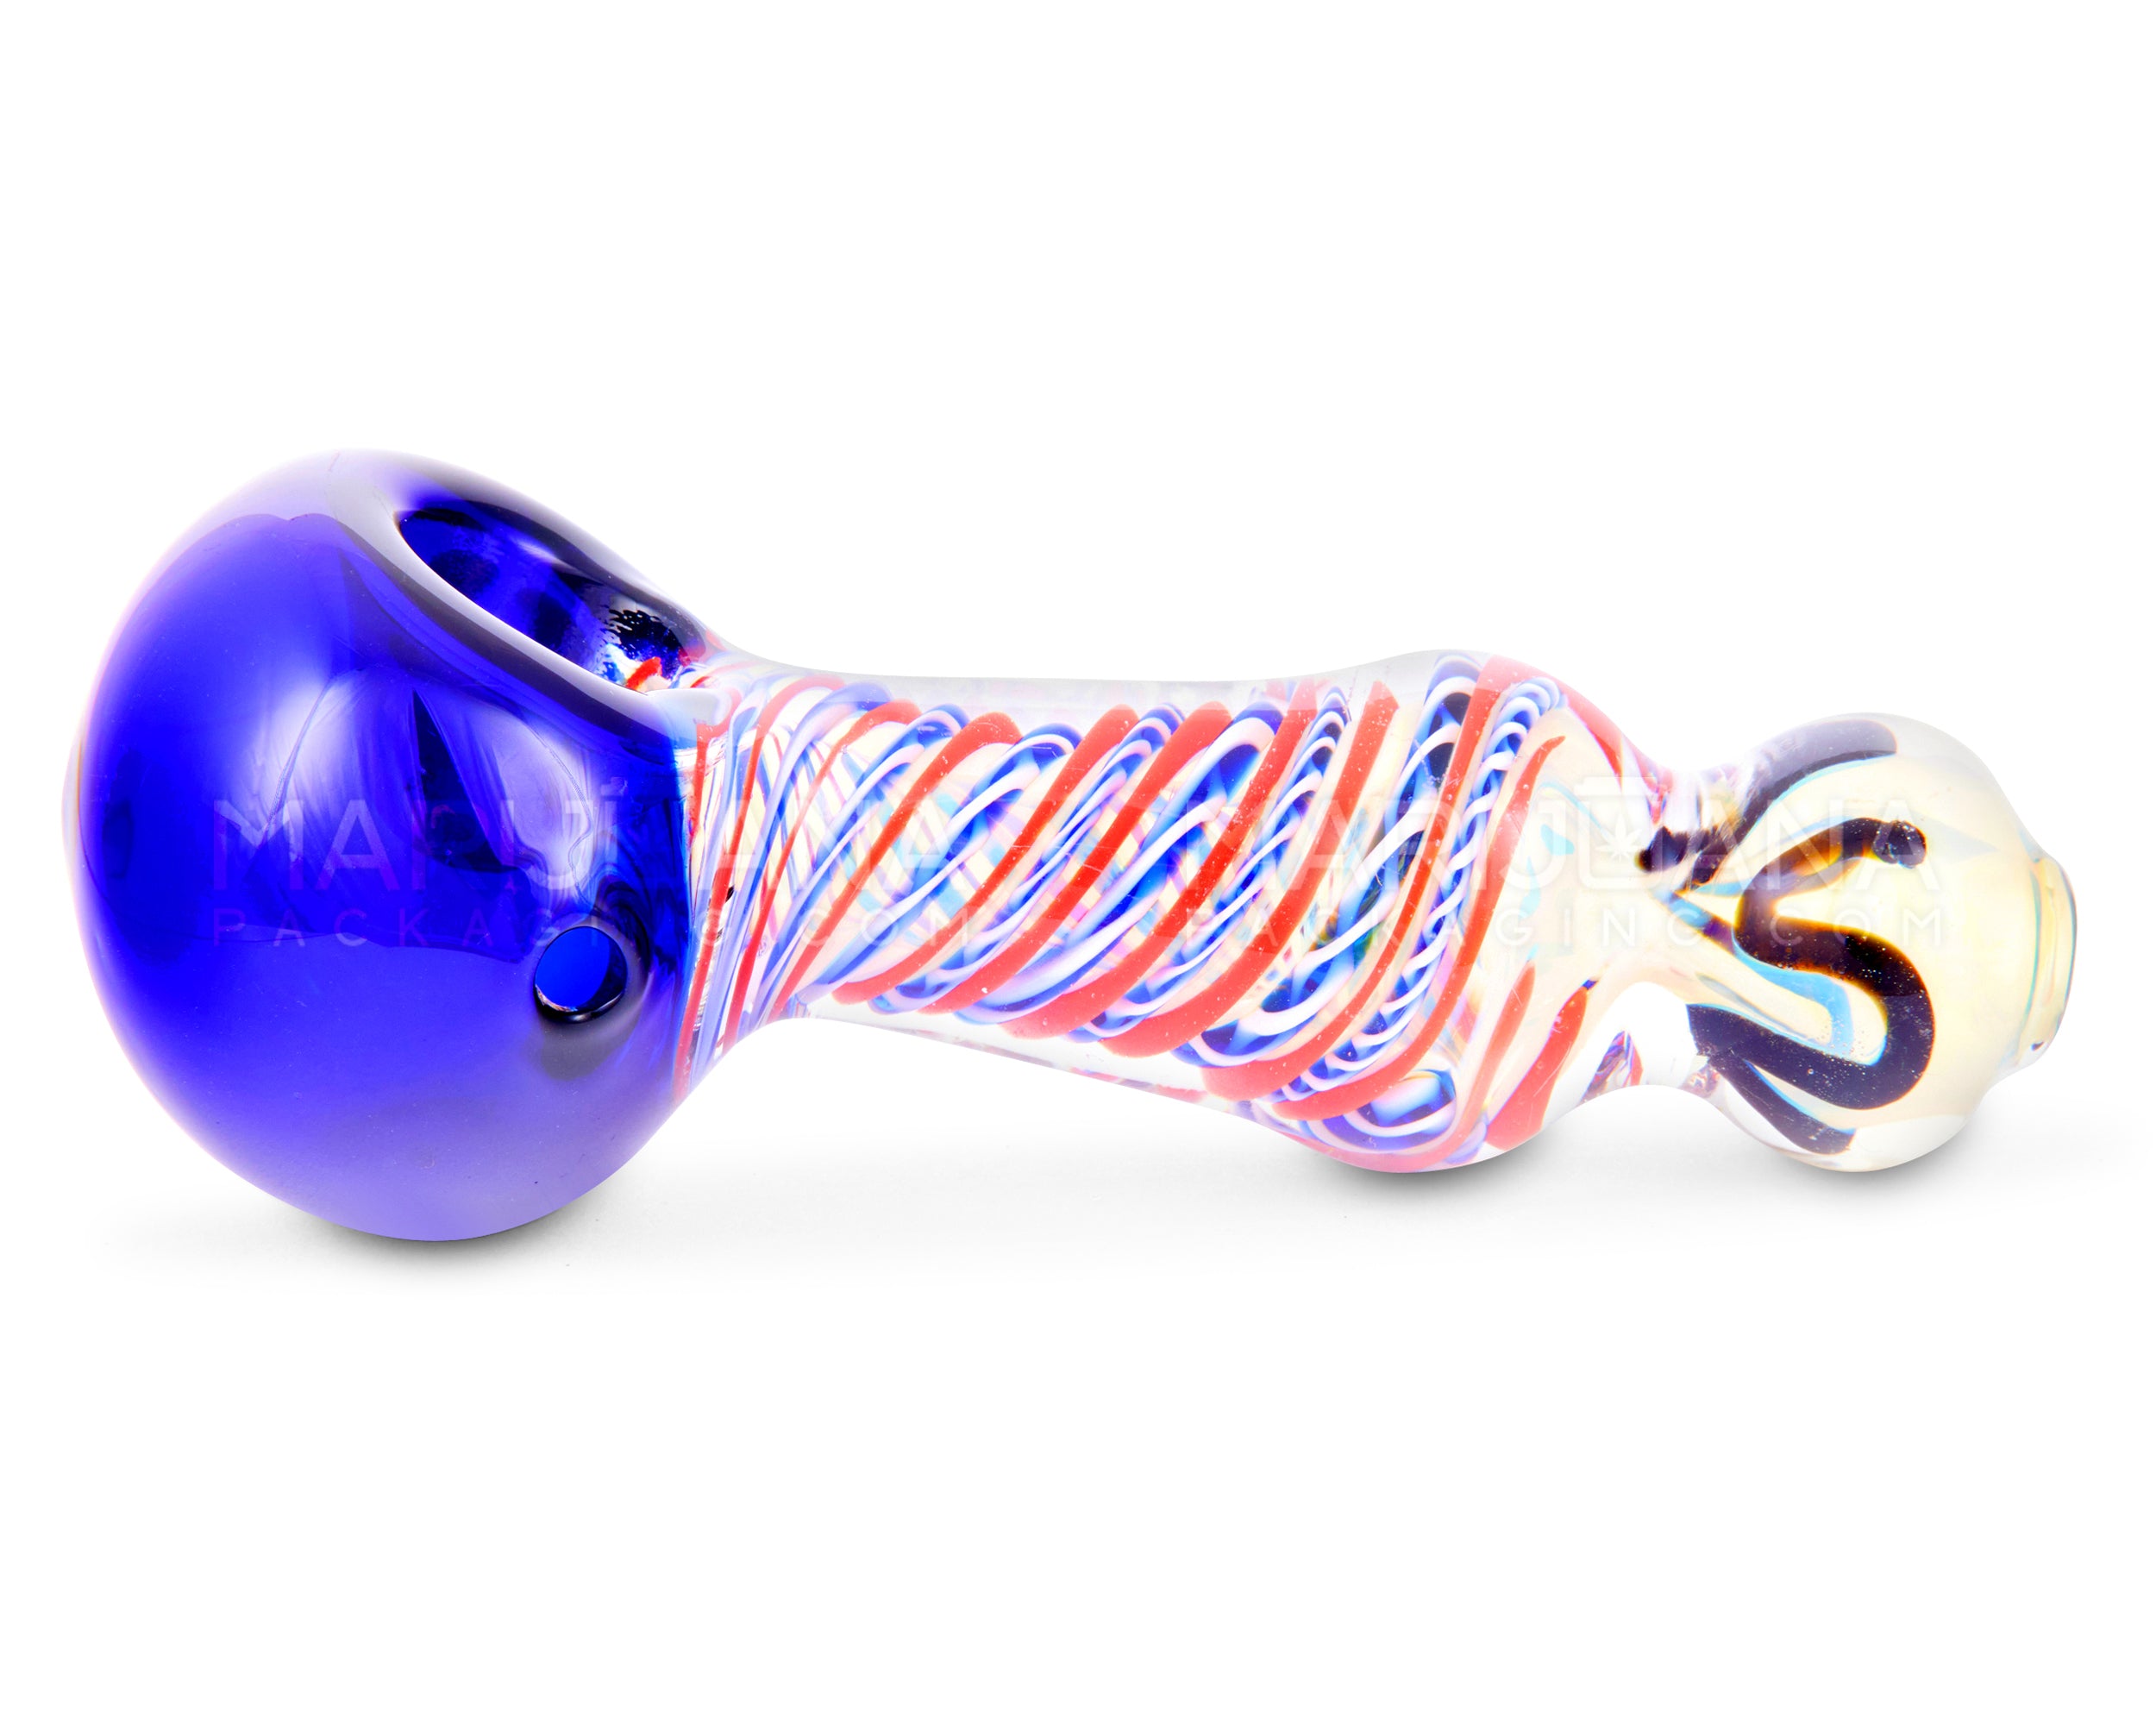 Spiral & Fumed Bulged Spoon Hand Pipe w/ Triple Knockers & Ribboning | 5in Long - Glass - Assorted - 5